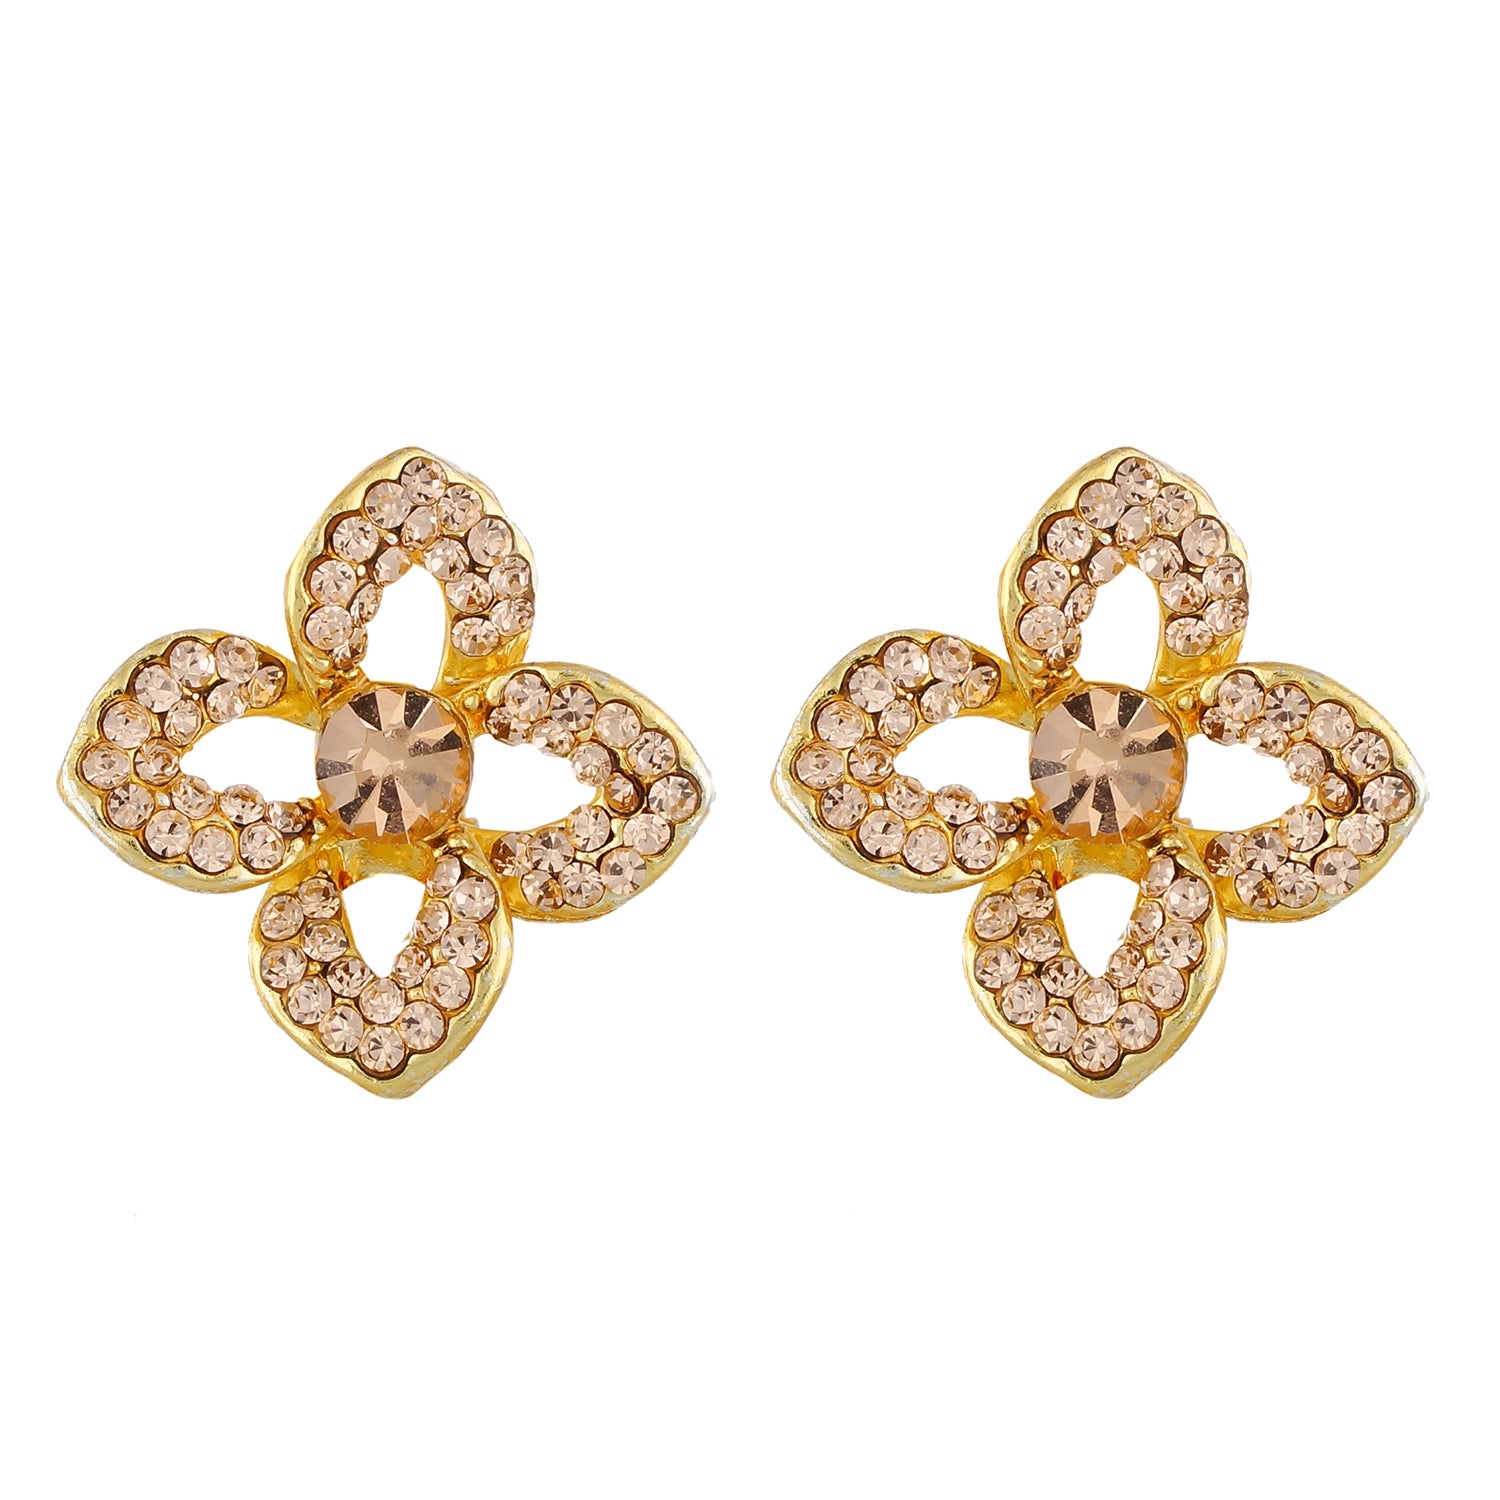 Stylish Beige and Gold Colour Floral Shape Alloy Clip On Earrings for Girls with on Pierced Ears